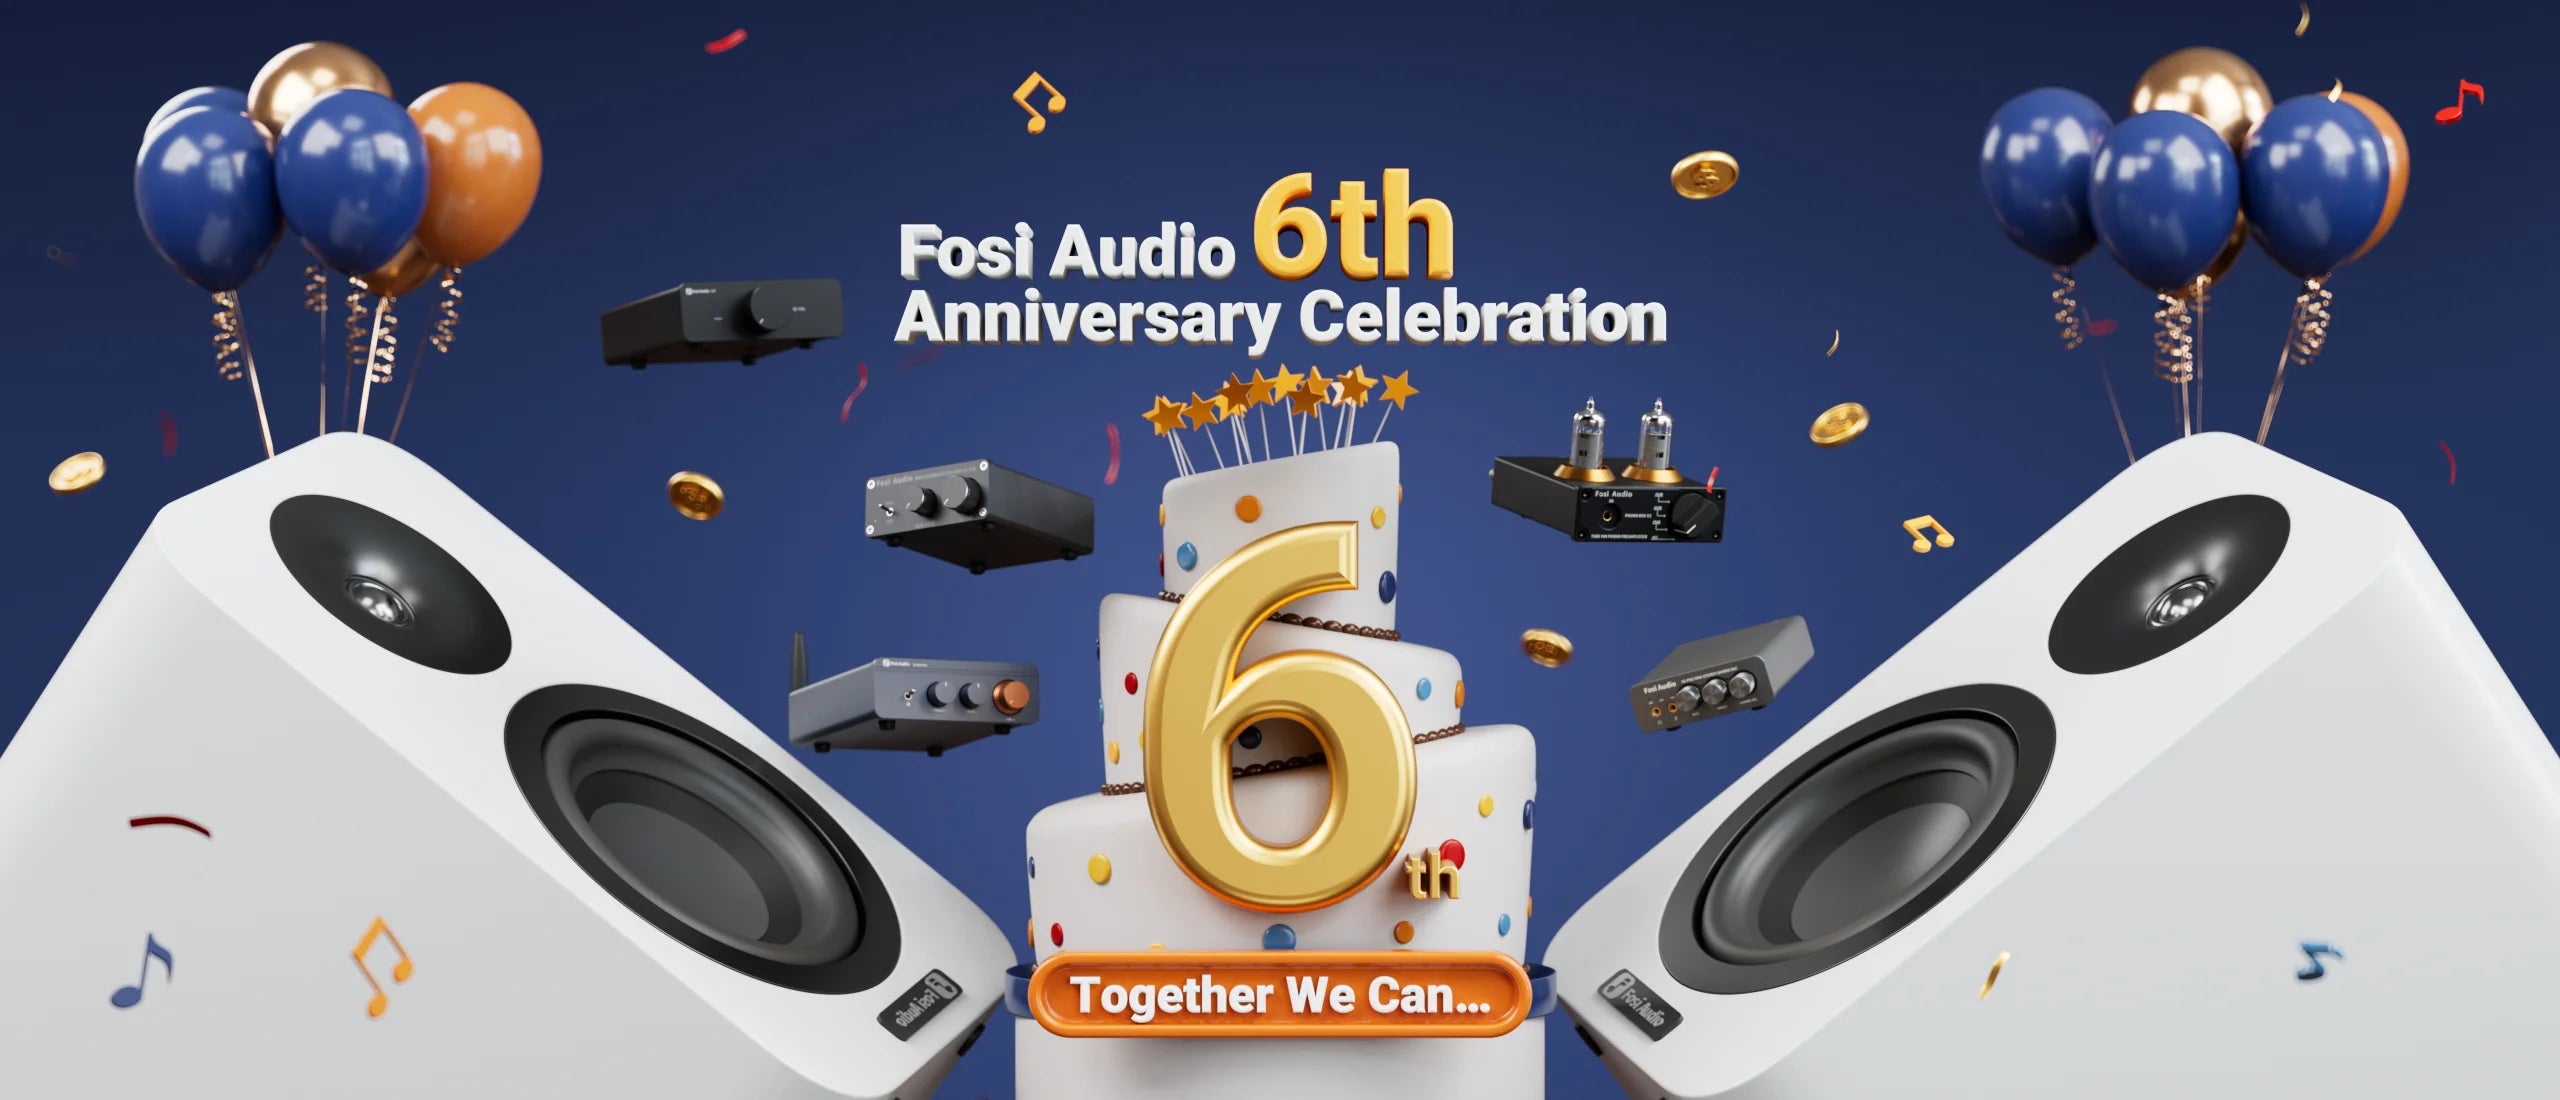 FOSI AUDIO CELEBRATES 6TH ANNIVERSARY WITH EXCLUSIVE FANS CAMPAIGN AND SALES - Fosi Audio